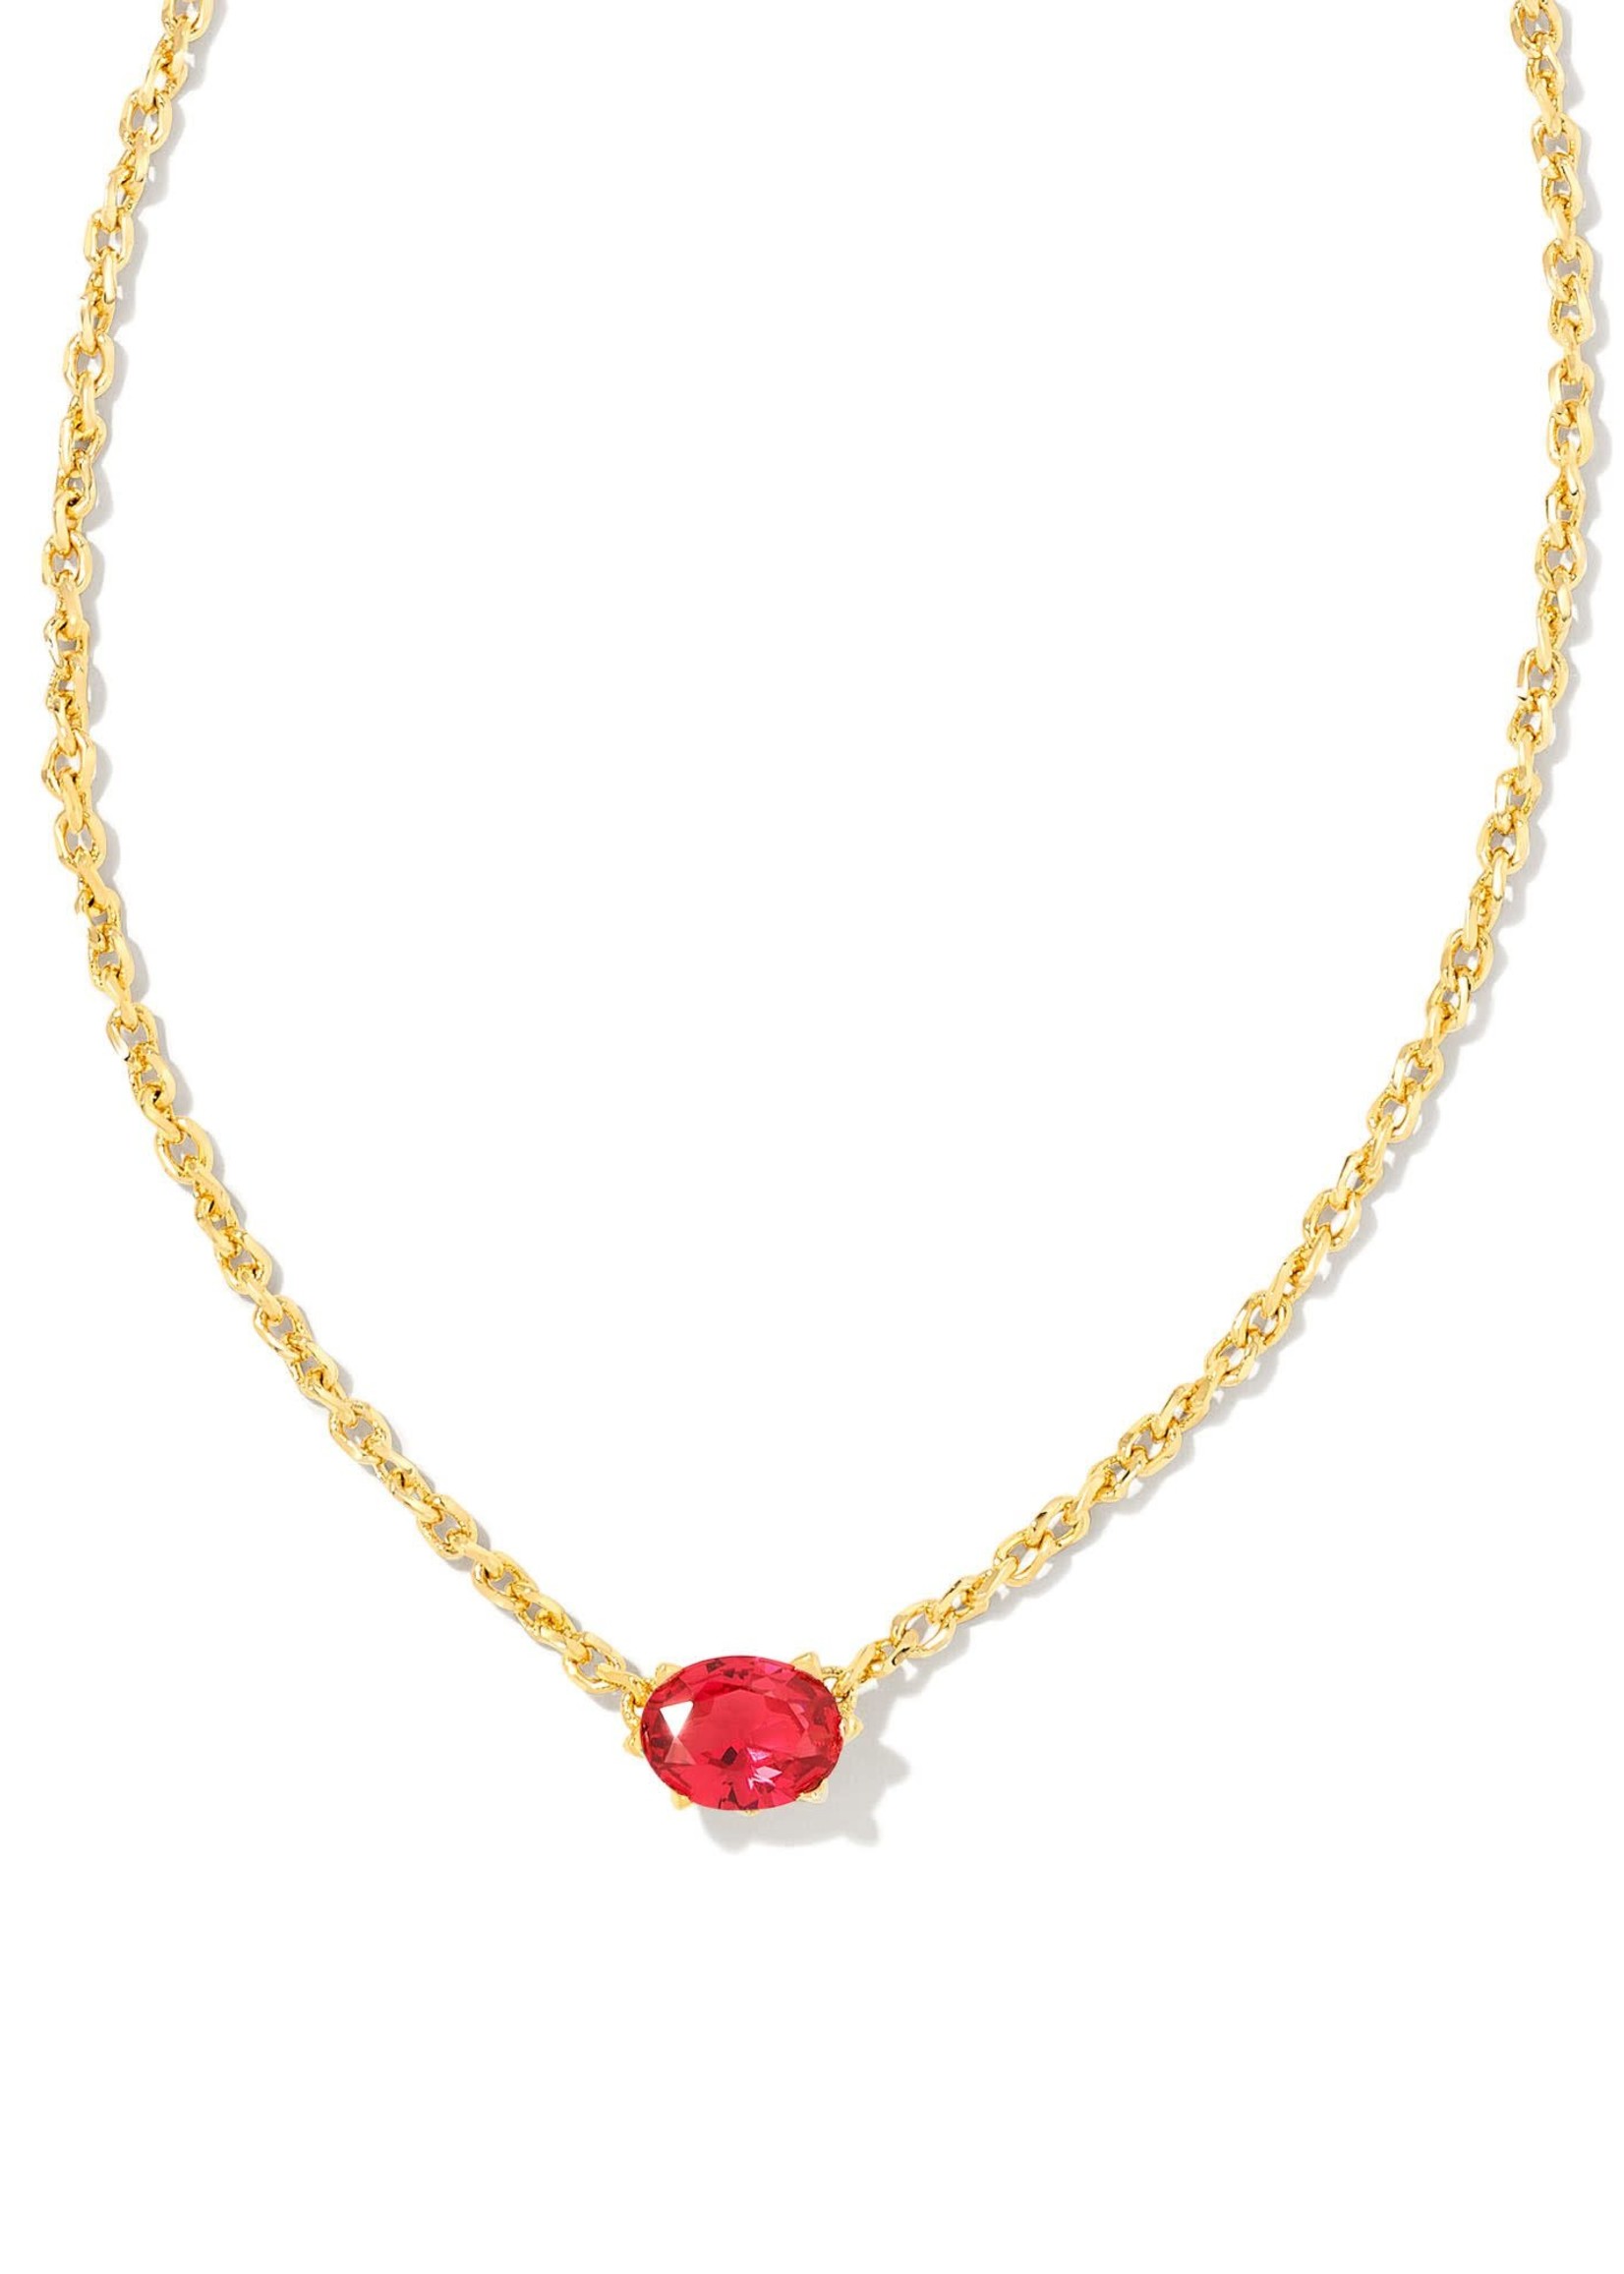 Kendra Scott CAILIN CRYSTAL PENDANT NECKLACE GOLD RED CRYSTAL